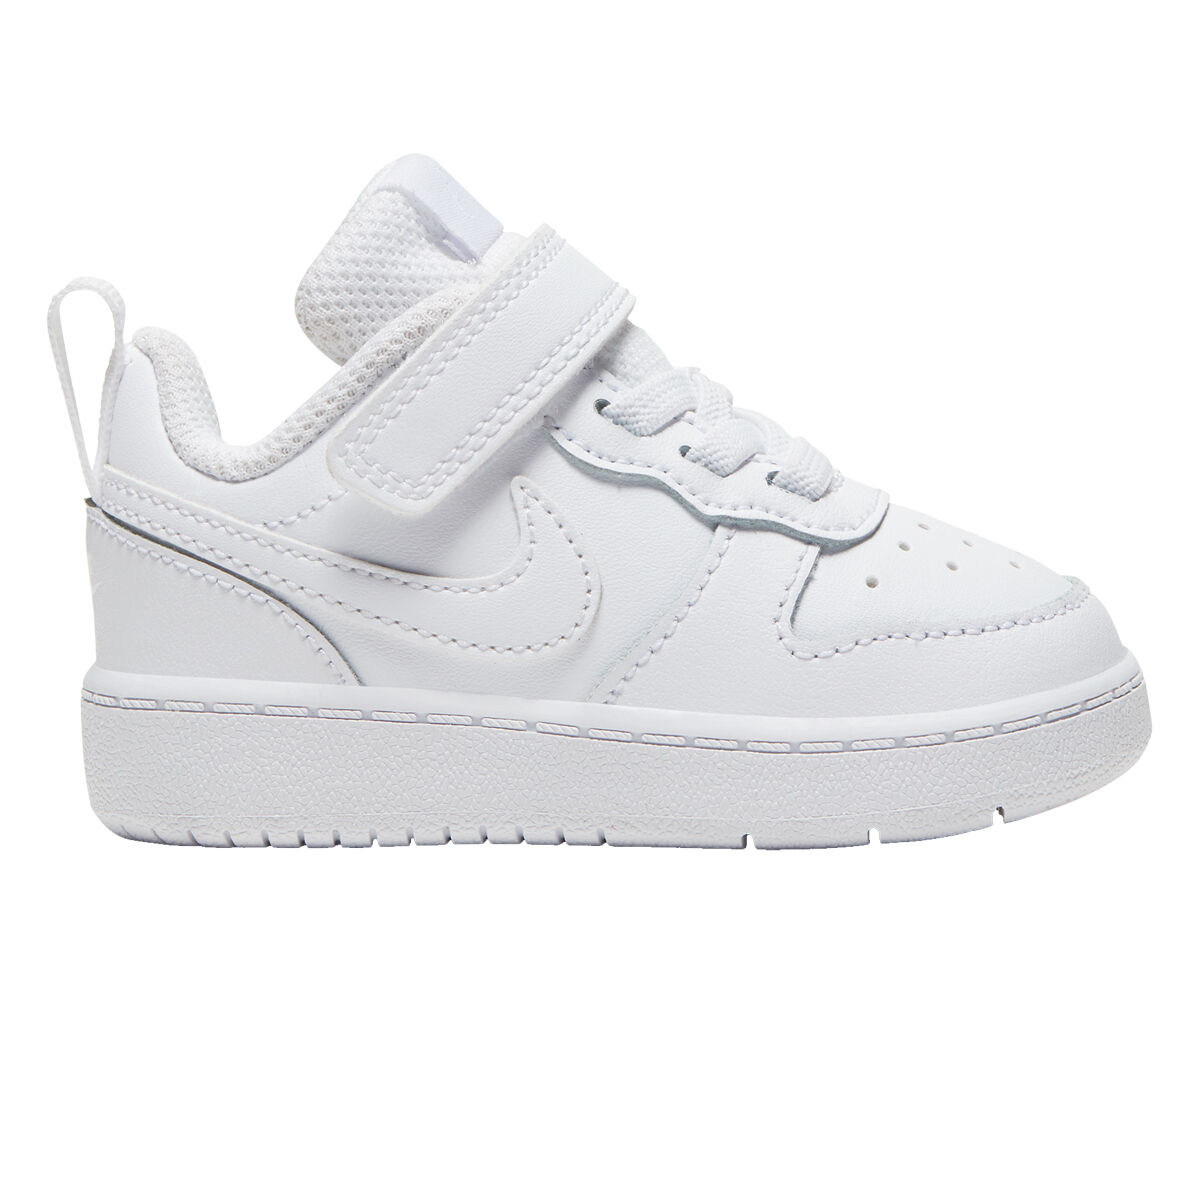 Nike Court Borough Low 2 Toddlers Shoes 